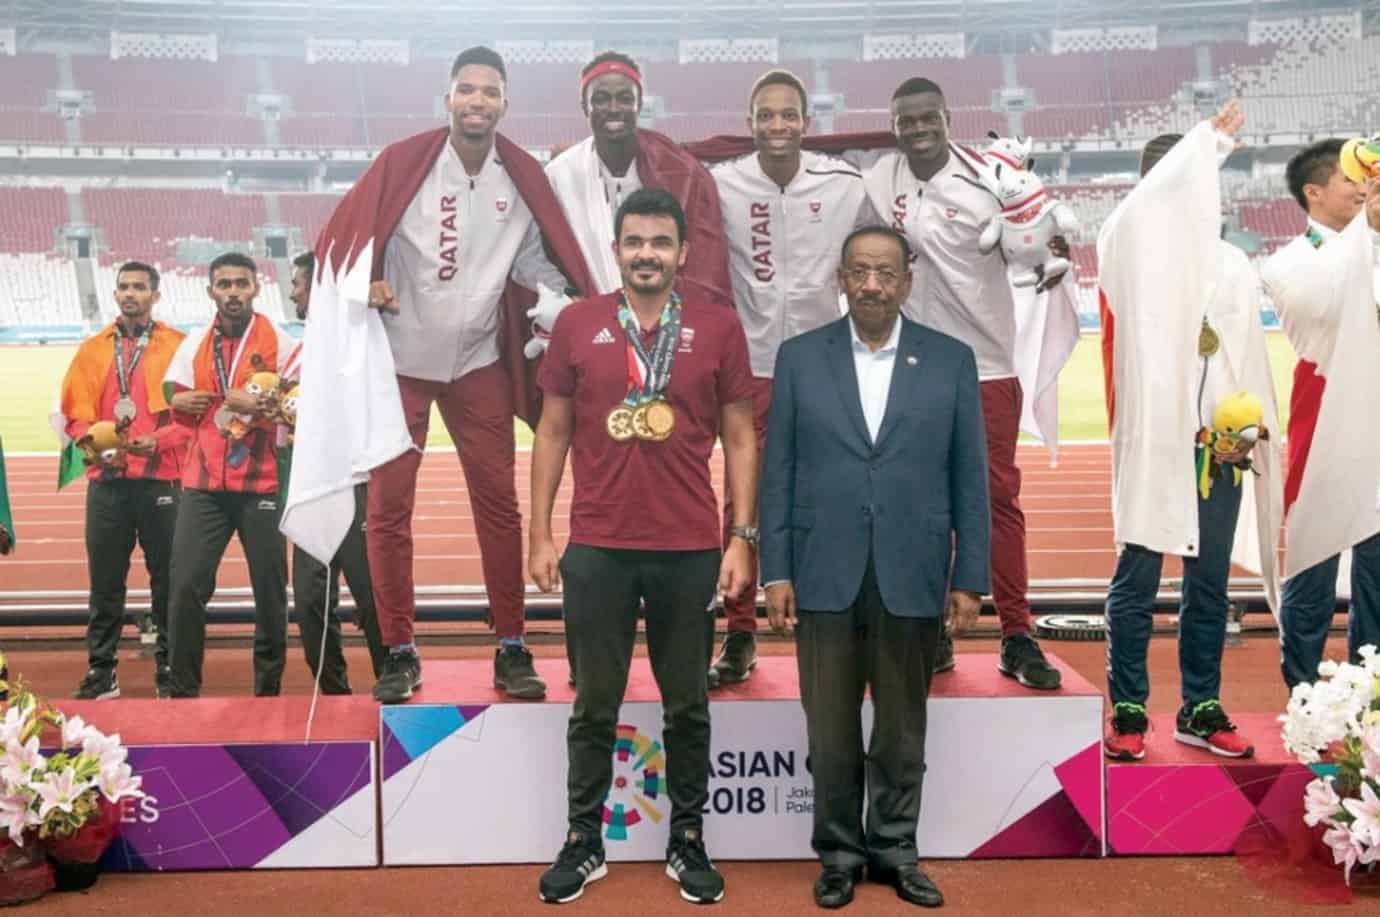 Qatar clinch relay gold with record run at Asian Games